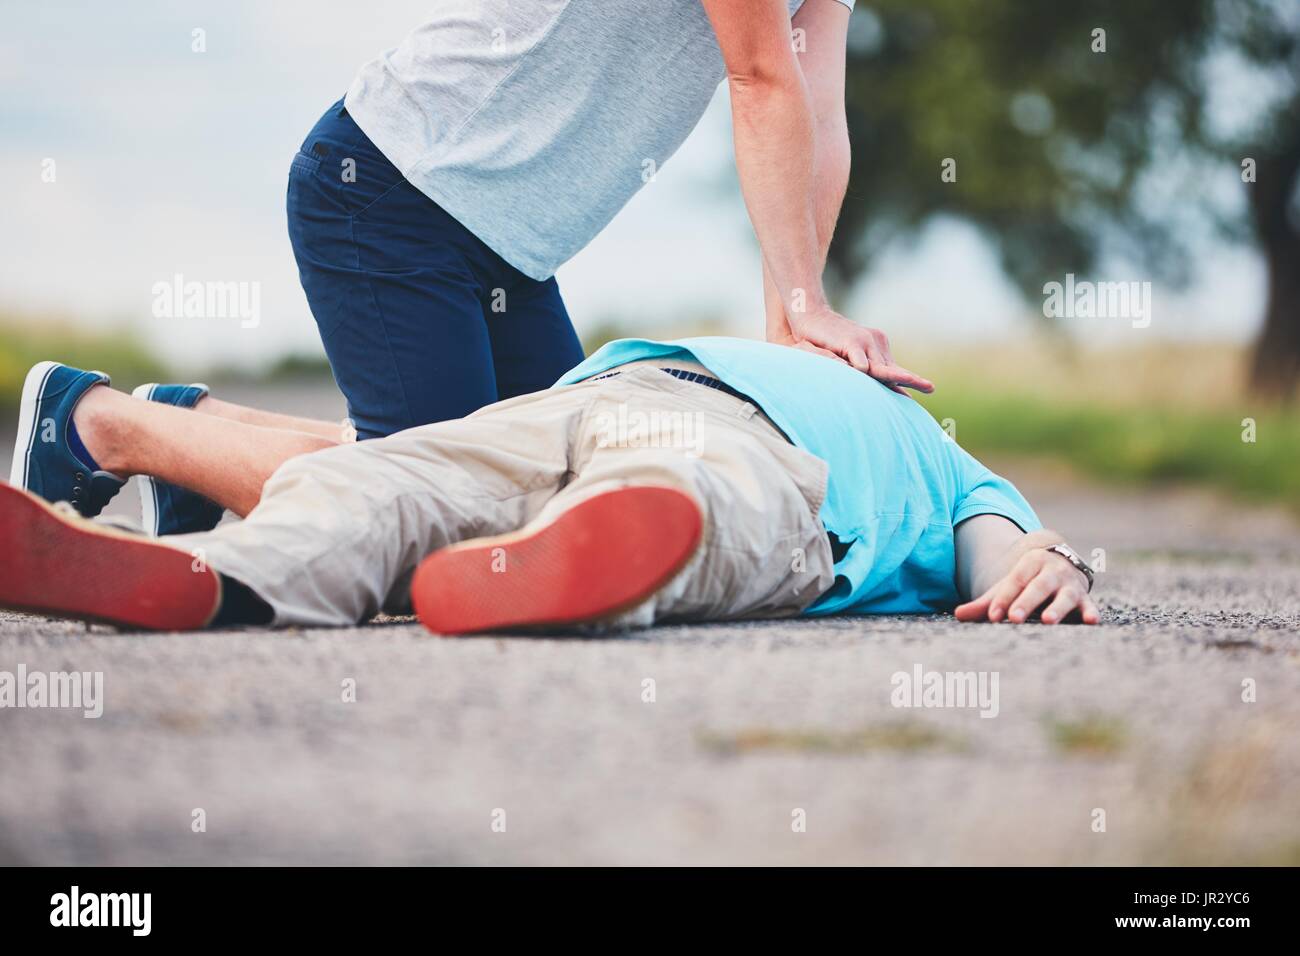 Dramatic resuscitation on the rural road. Themes rescue, help and hope. Stock Photo